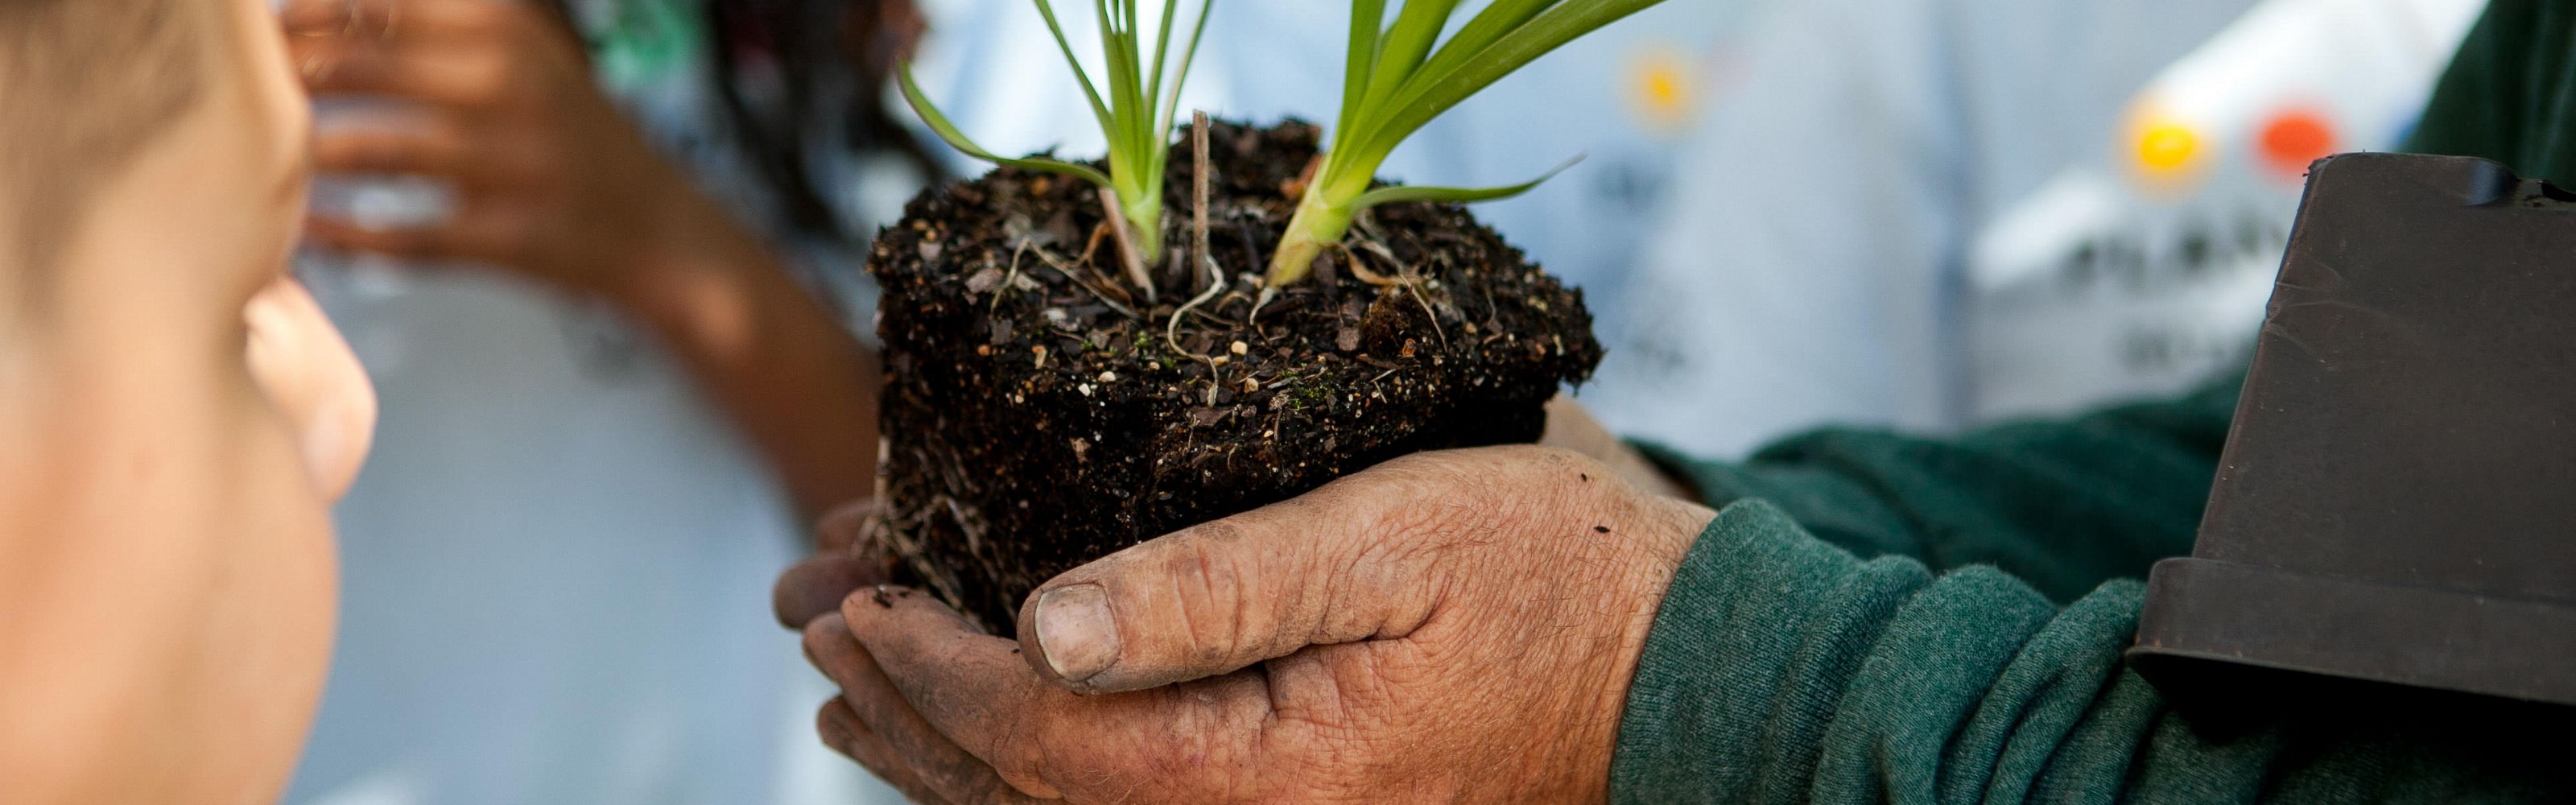 Cupped hands holding soil containing a sprouting plant.